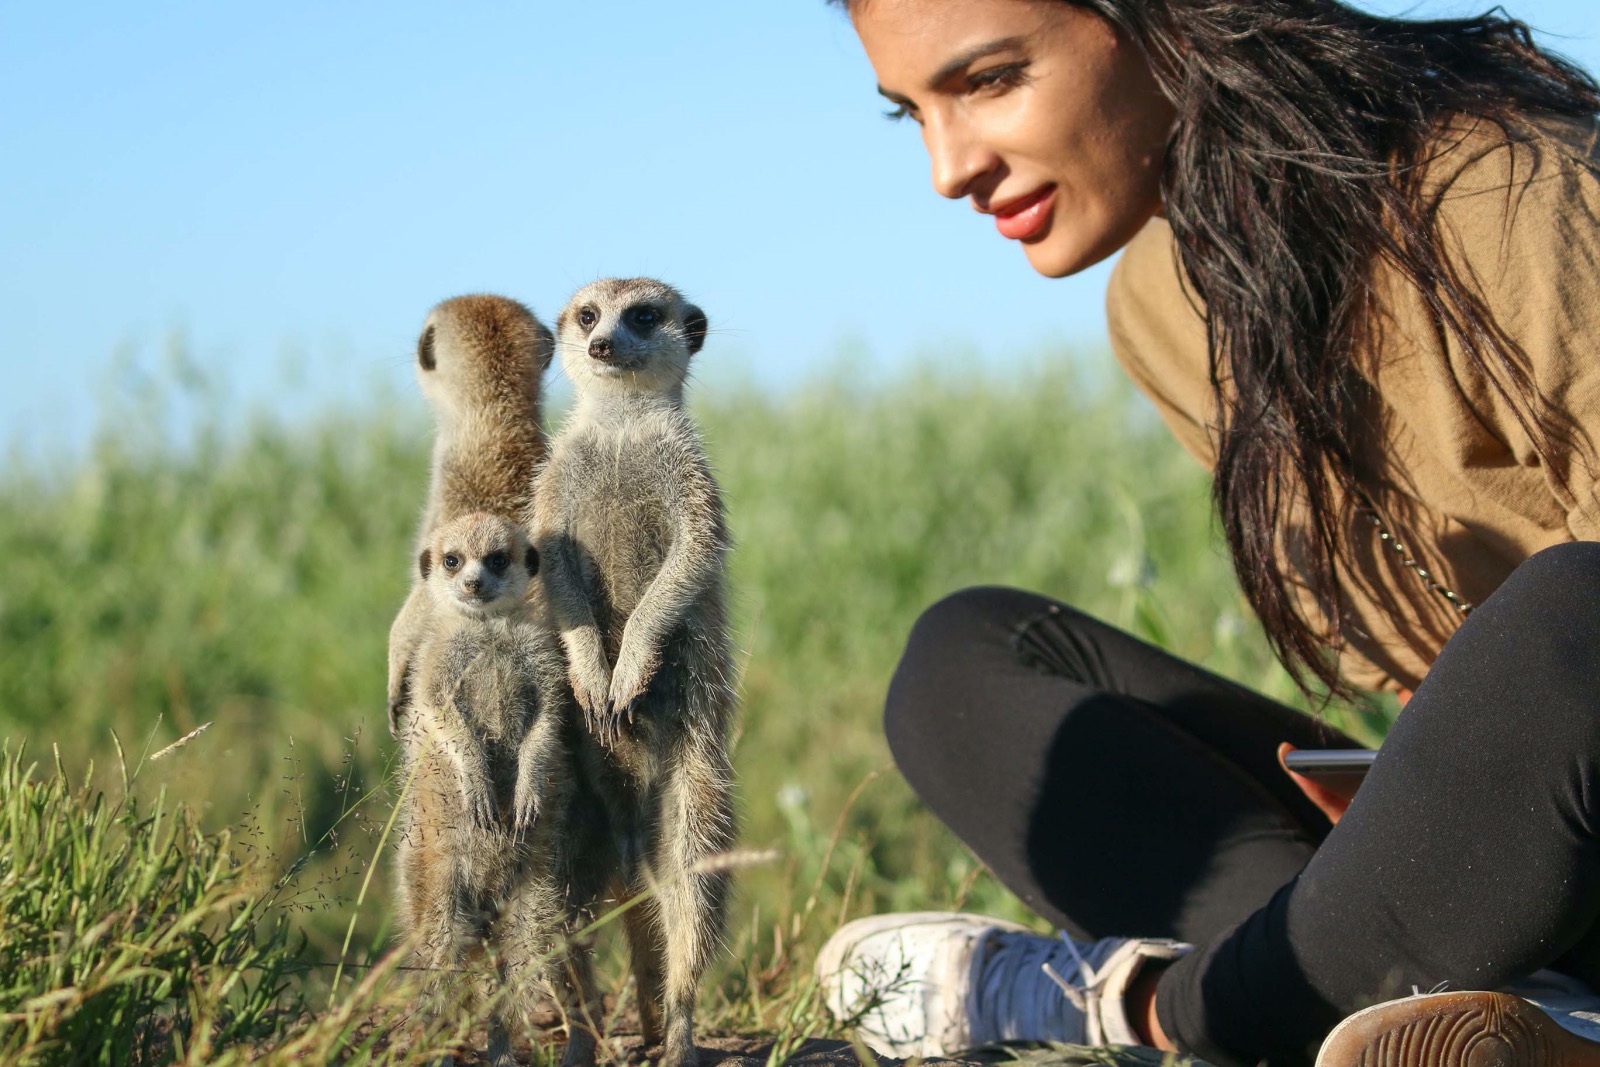 Habituated meerkats stand close to a fascinated visitor during the meerkat experience in Botswana